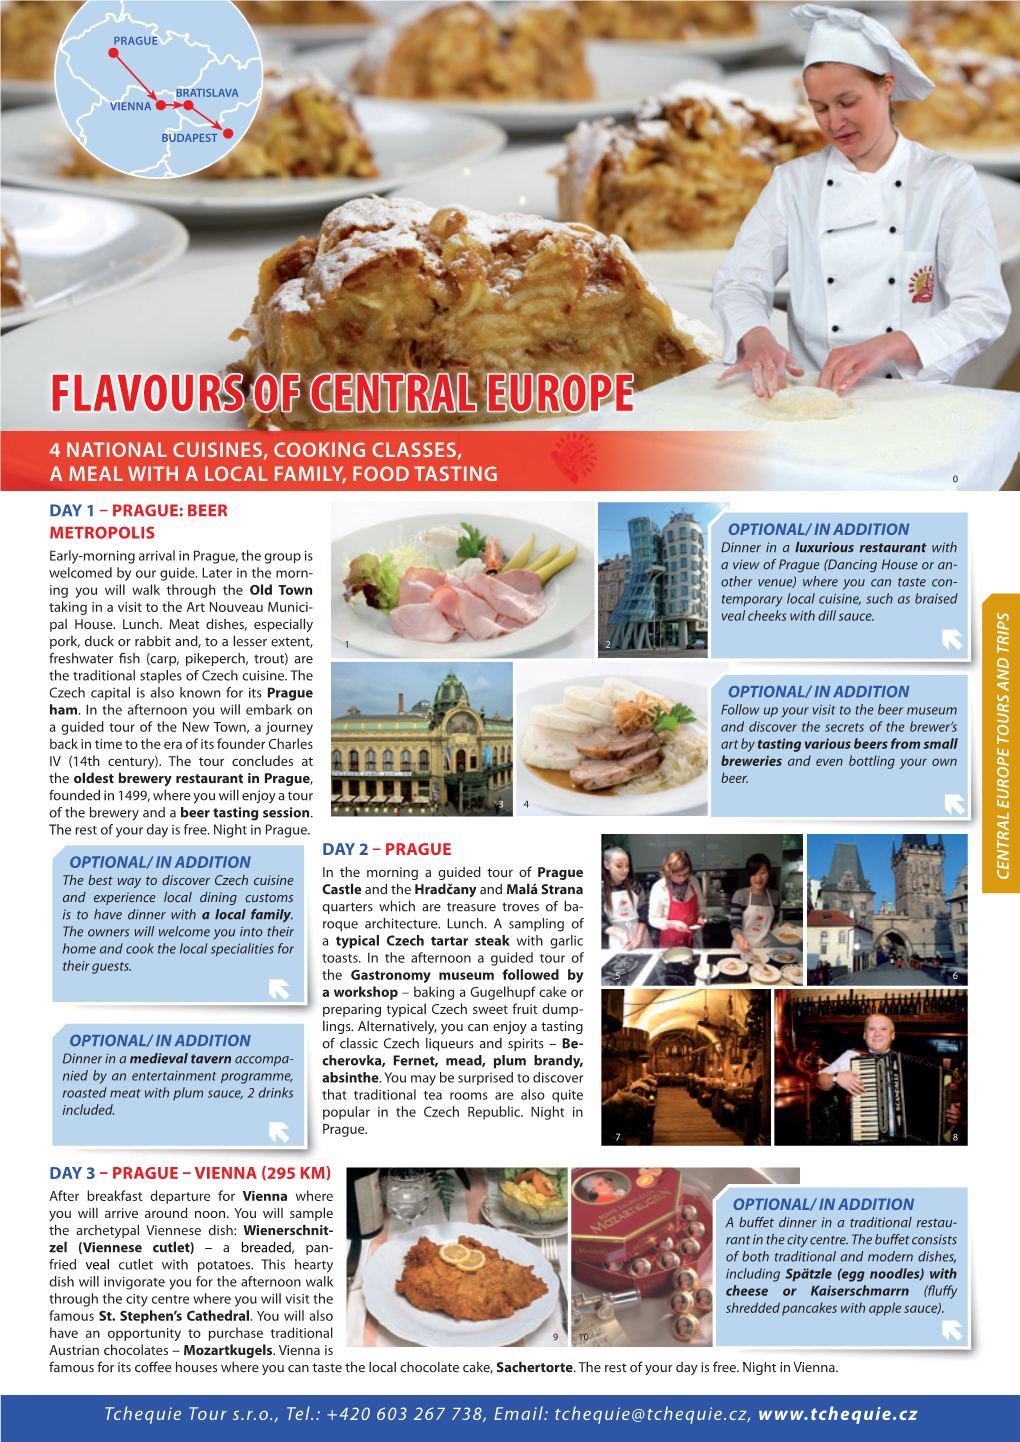 Flavours of Central Europe 16 4 National Cuisines, Cooking Classes